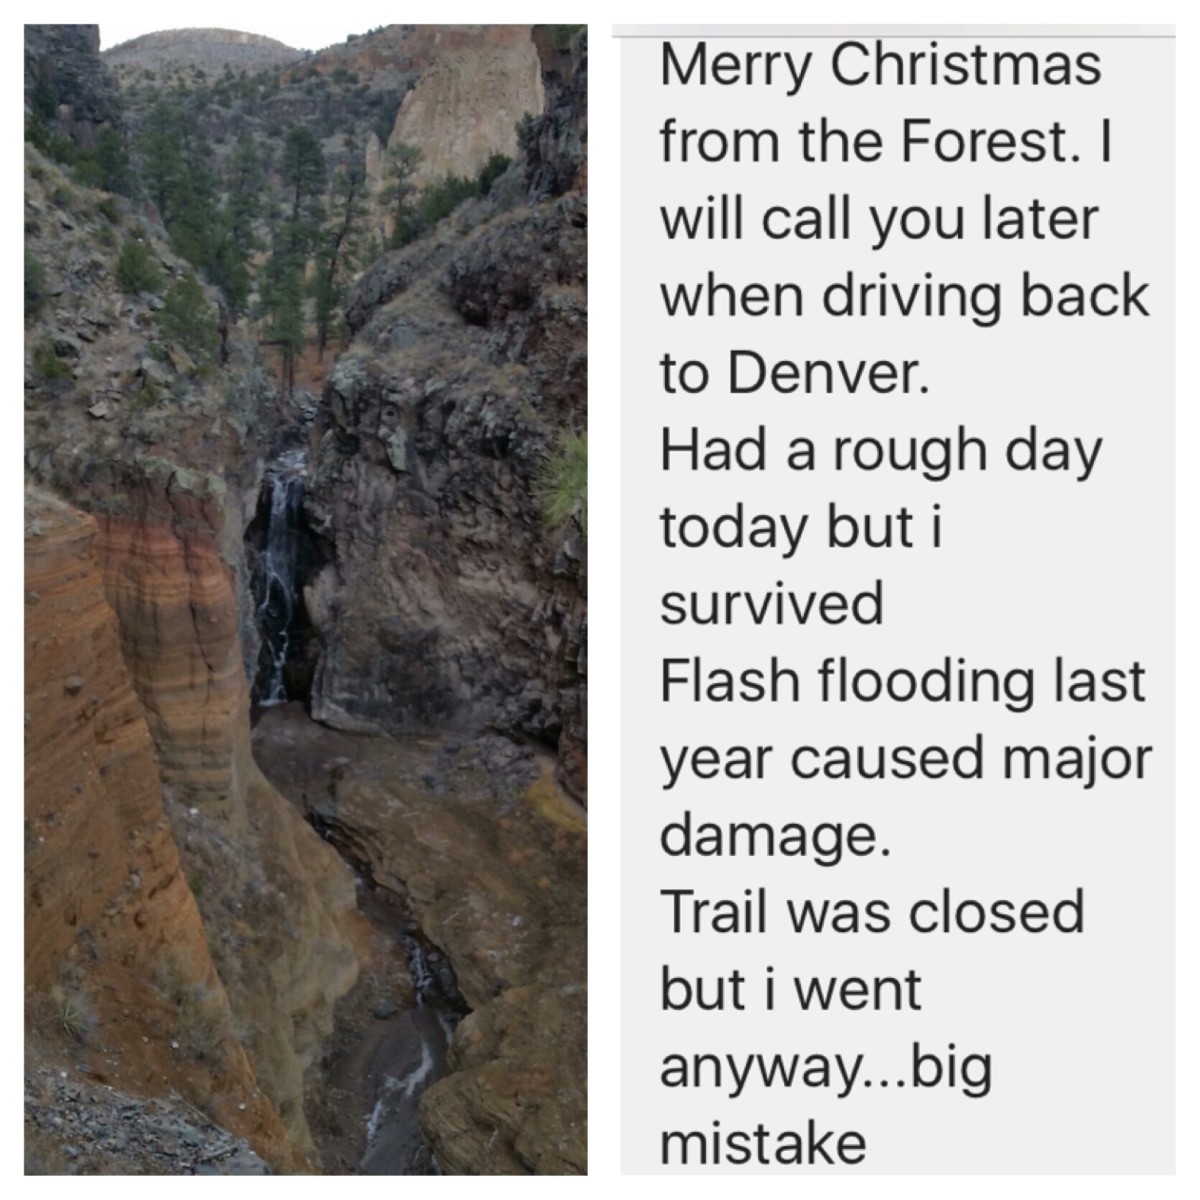 This is the area that Randy went to scout in December. This is the text he sent, along with the photo. I forwarded this exact picture to law enforcement and to SAR in hopes that they will search it again. 